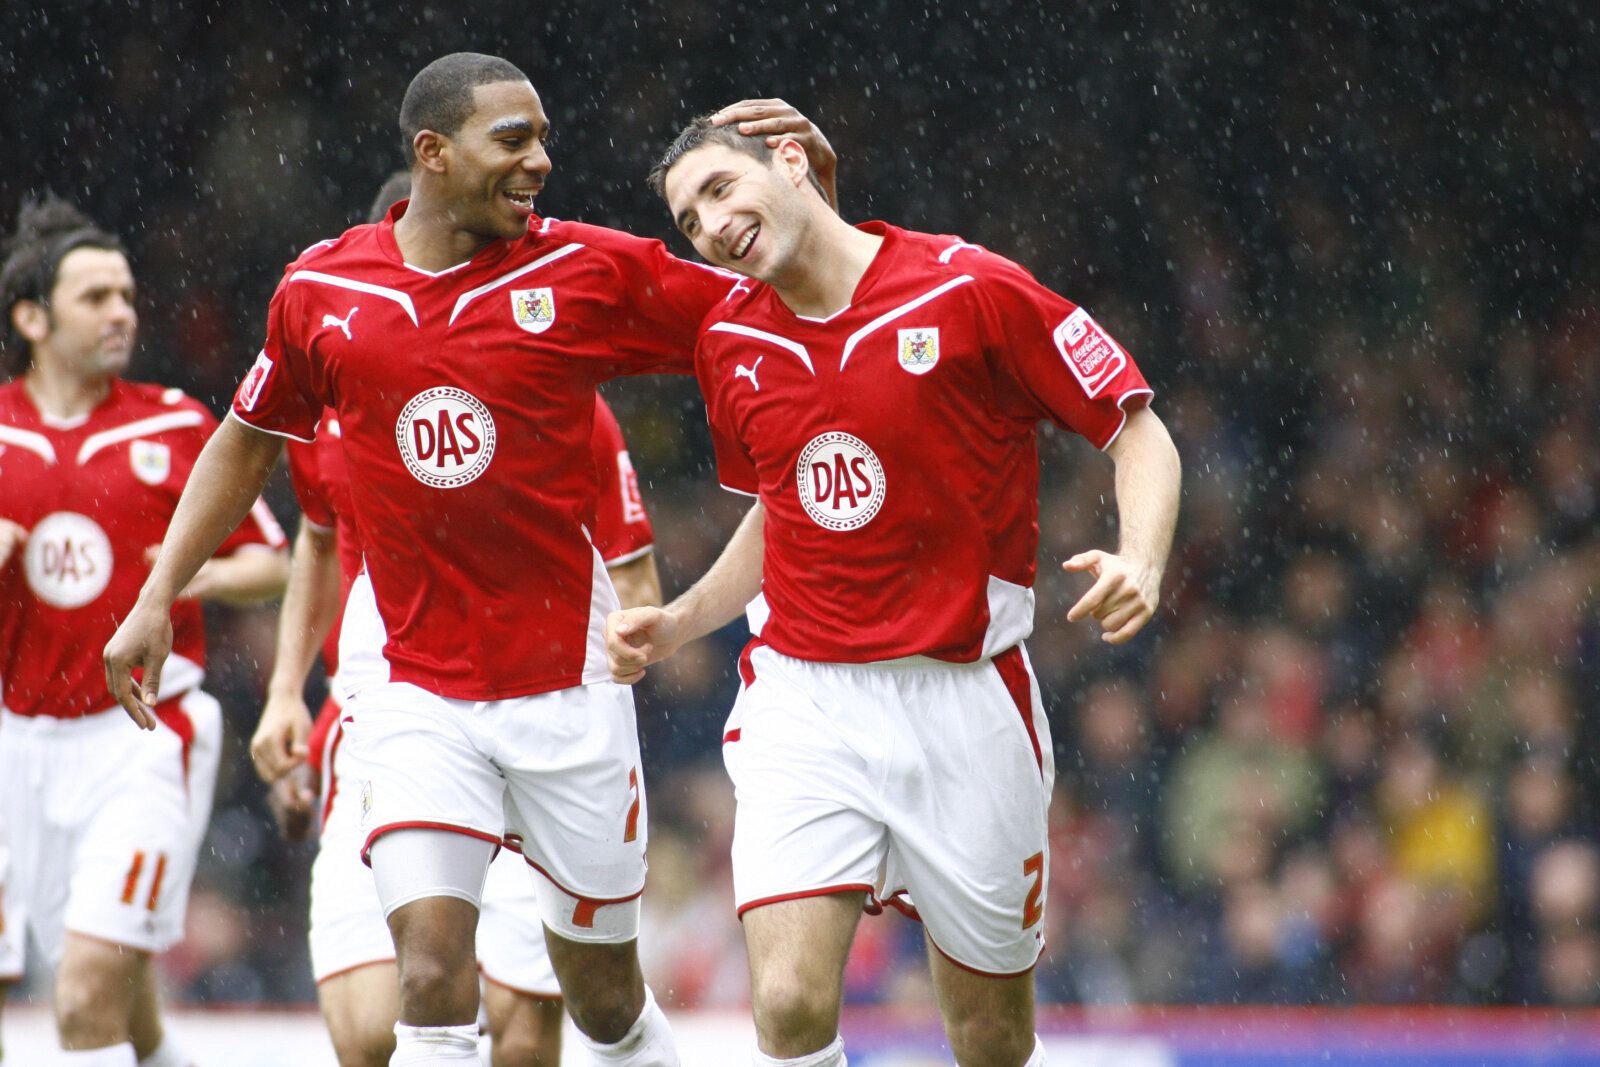 Football - Bristol City v Nottingham Forest Coca-Cola Football League Championship - Ashton Gate - 09/10 - 3/4/10 
Bradley Orr (R) celebrates with Marvin Elliot after Liam Fontaine (Not Pictured) scored Bristol's first goal 
Mandatory Credit: Action Images / Paul Redding 
Livepic